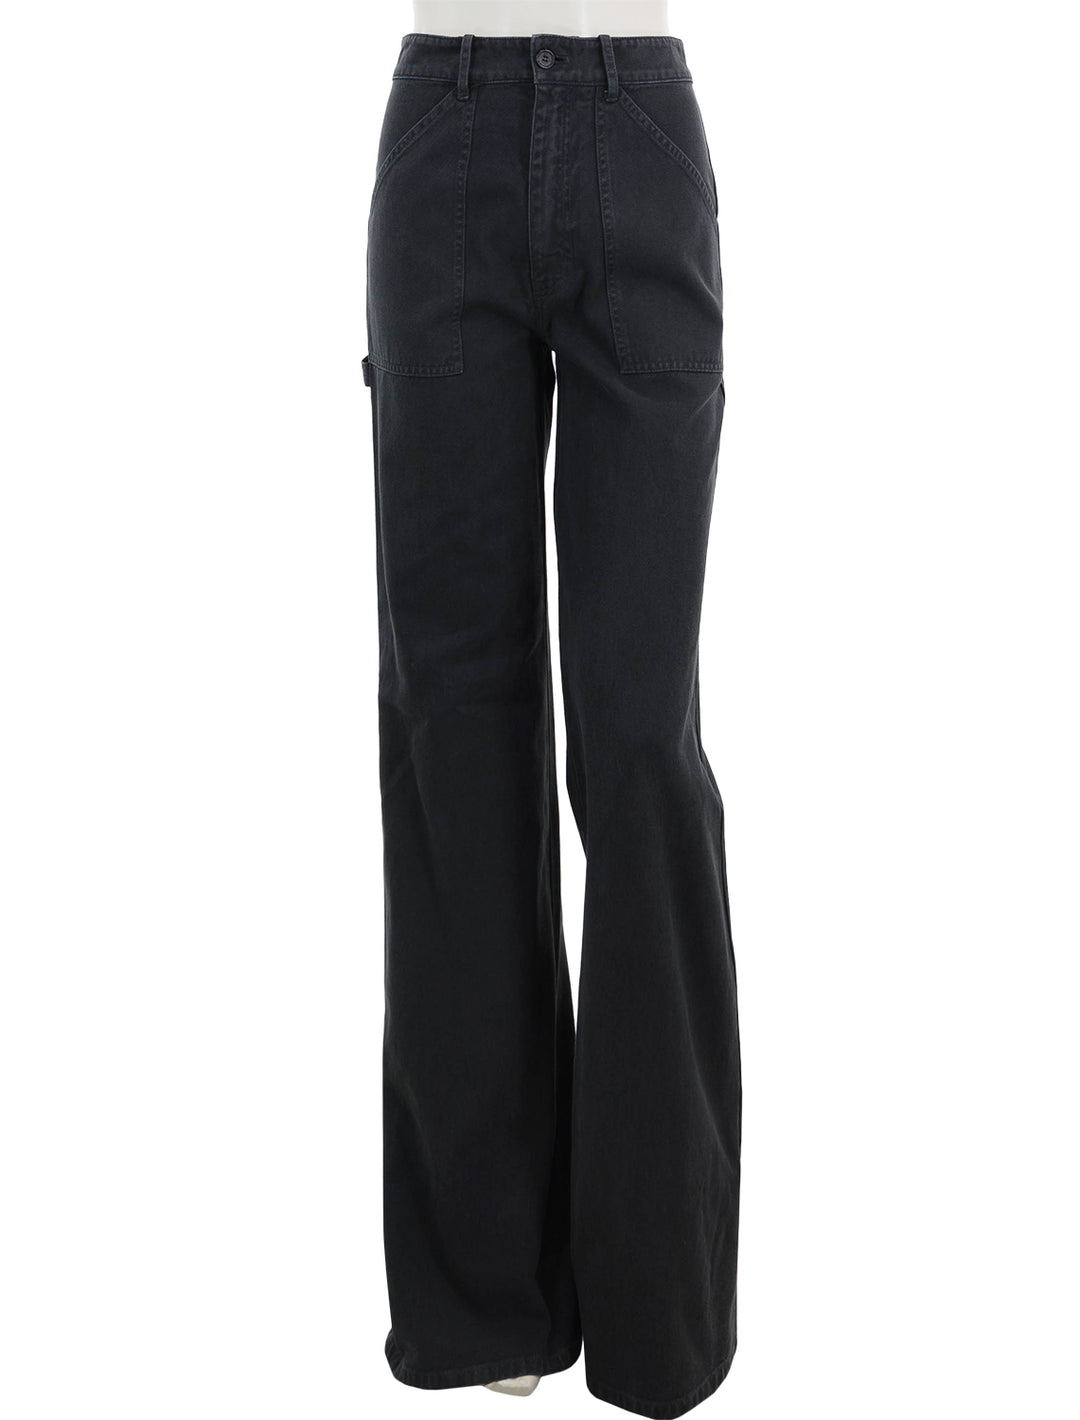 Front view of Nili Lotan's quentin pant in carbon.